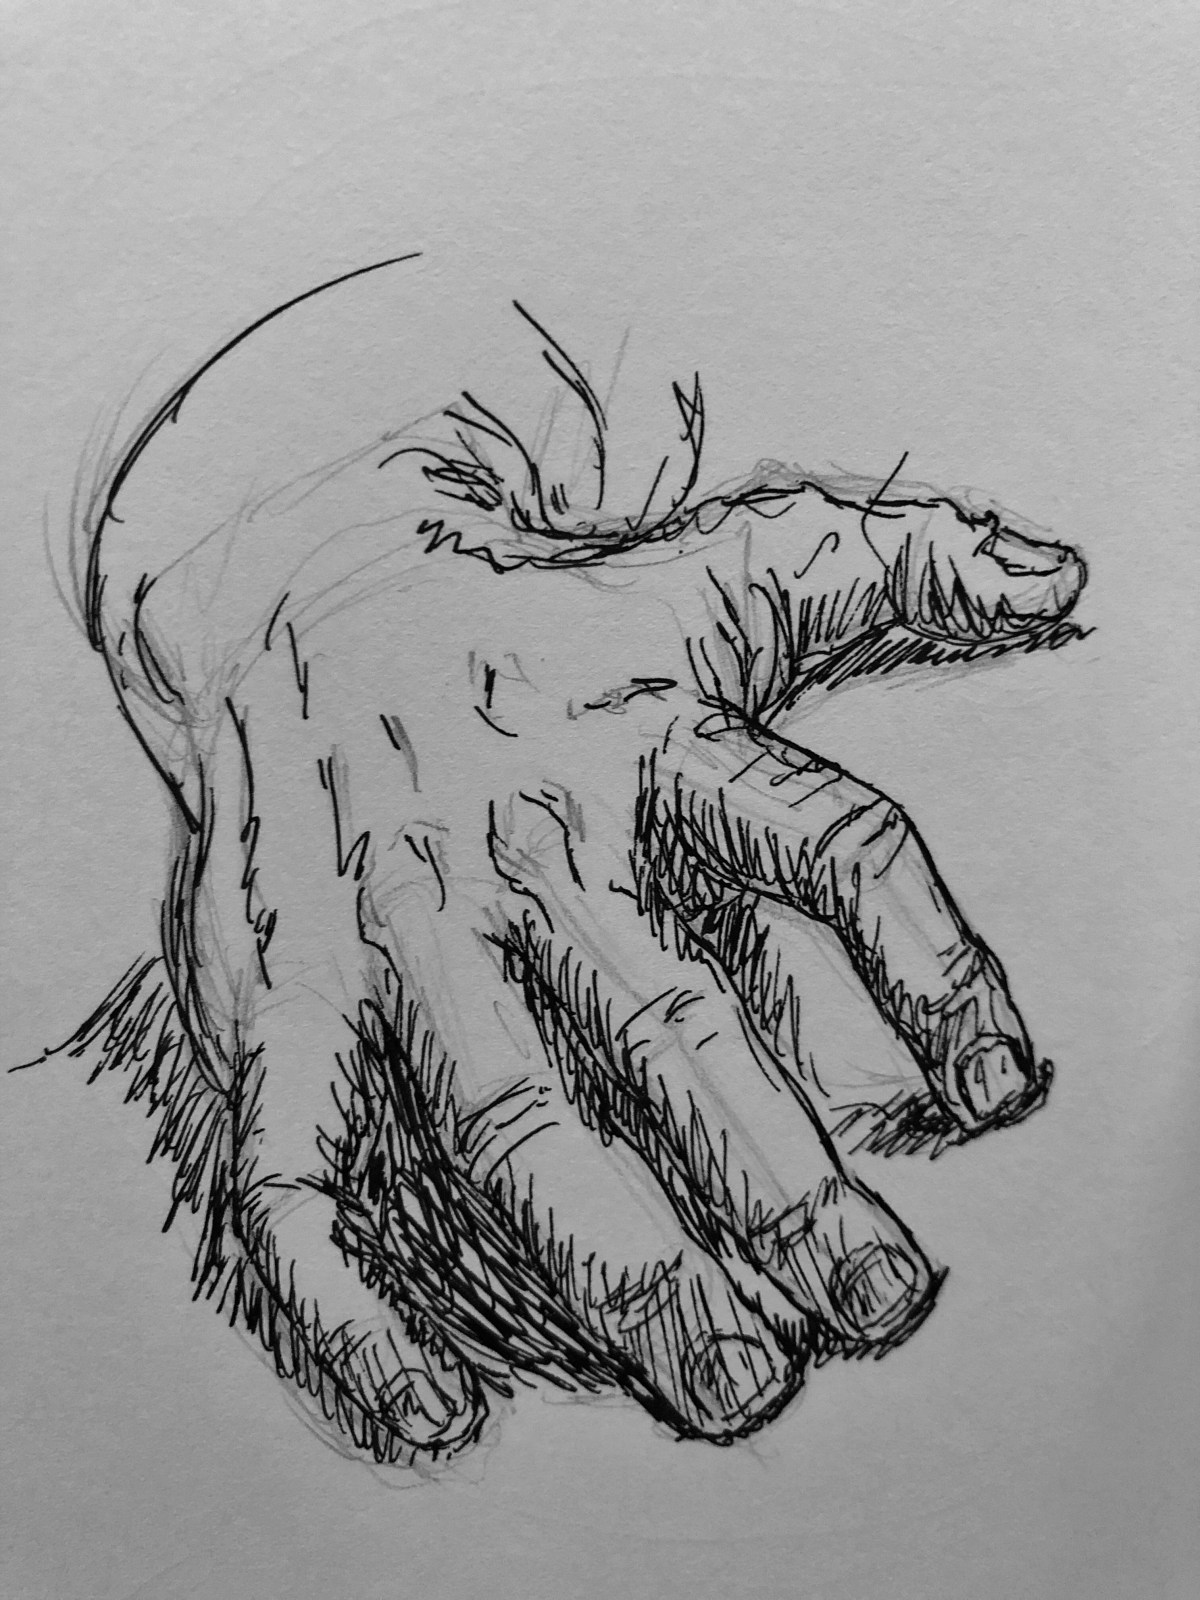 Hand resting on a surface. Illustration.